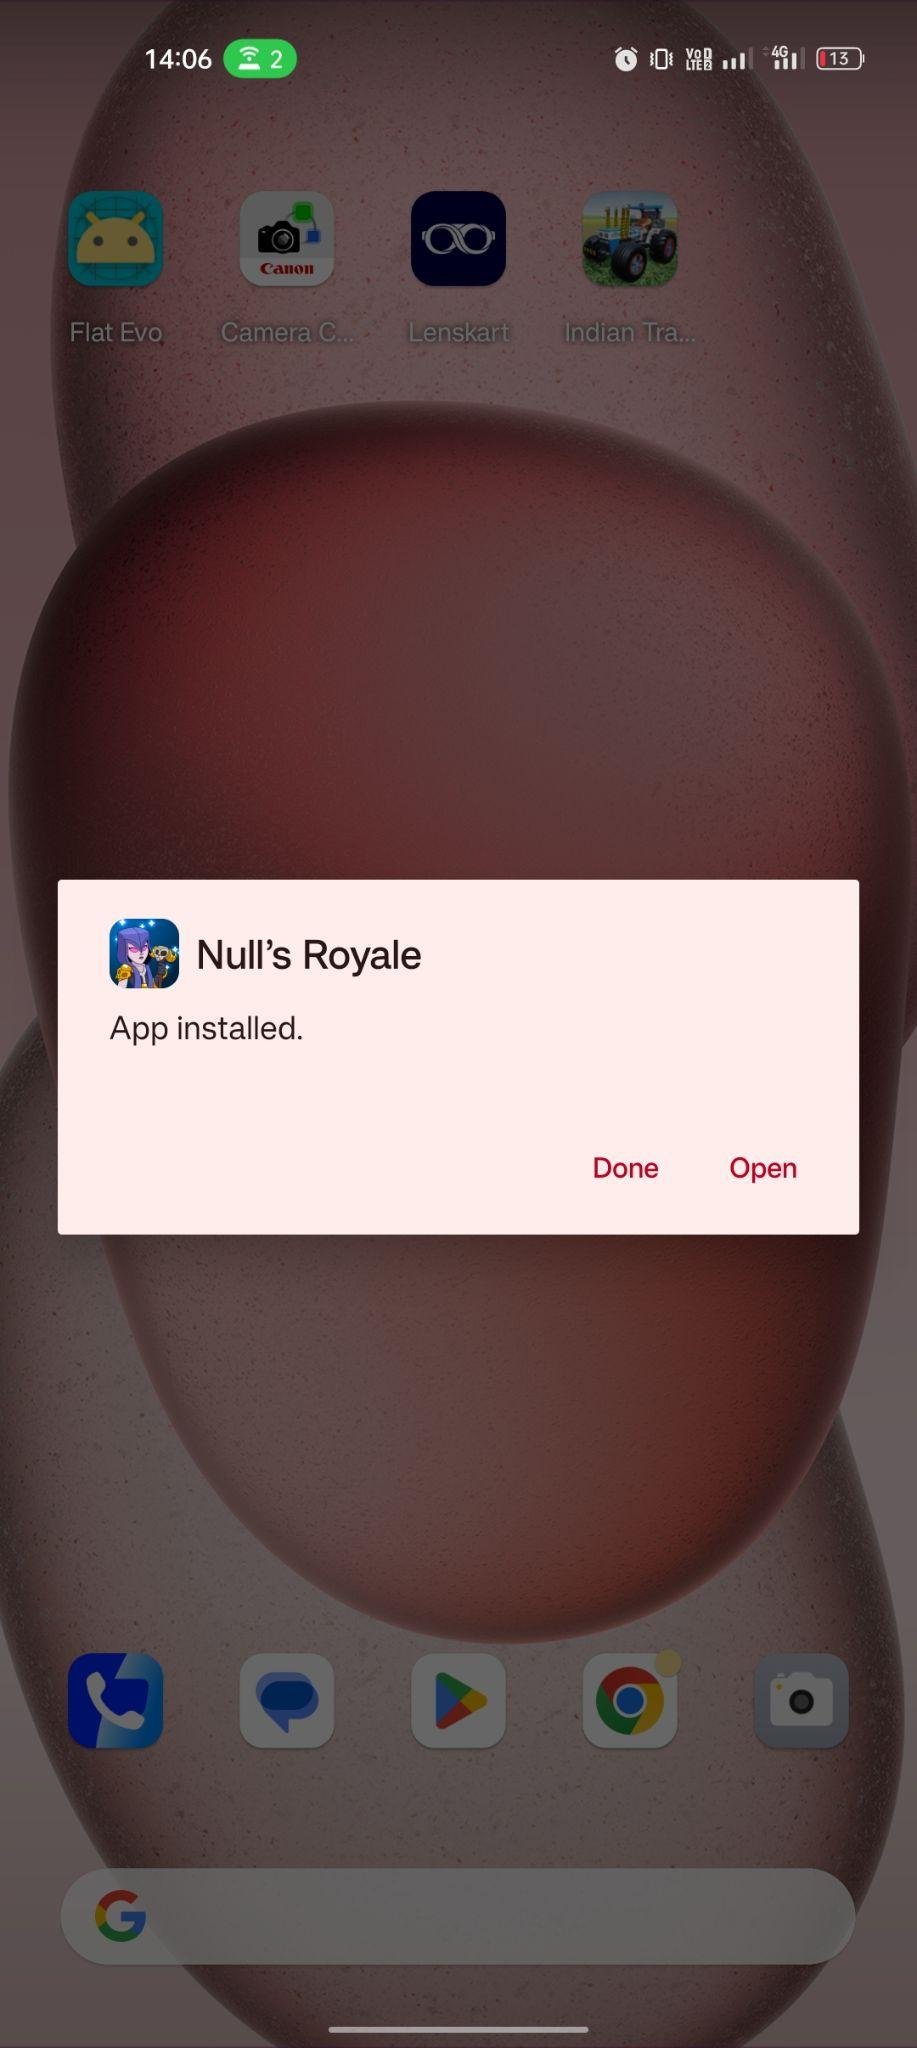 Null’s Royale apk installed